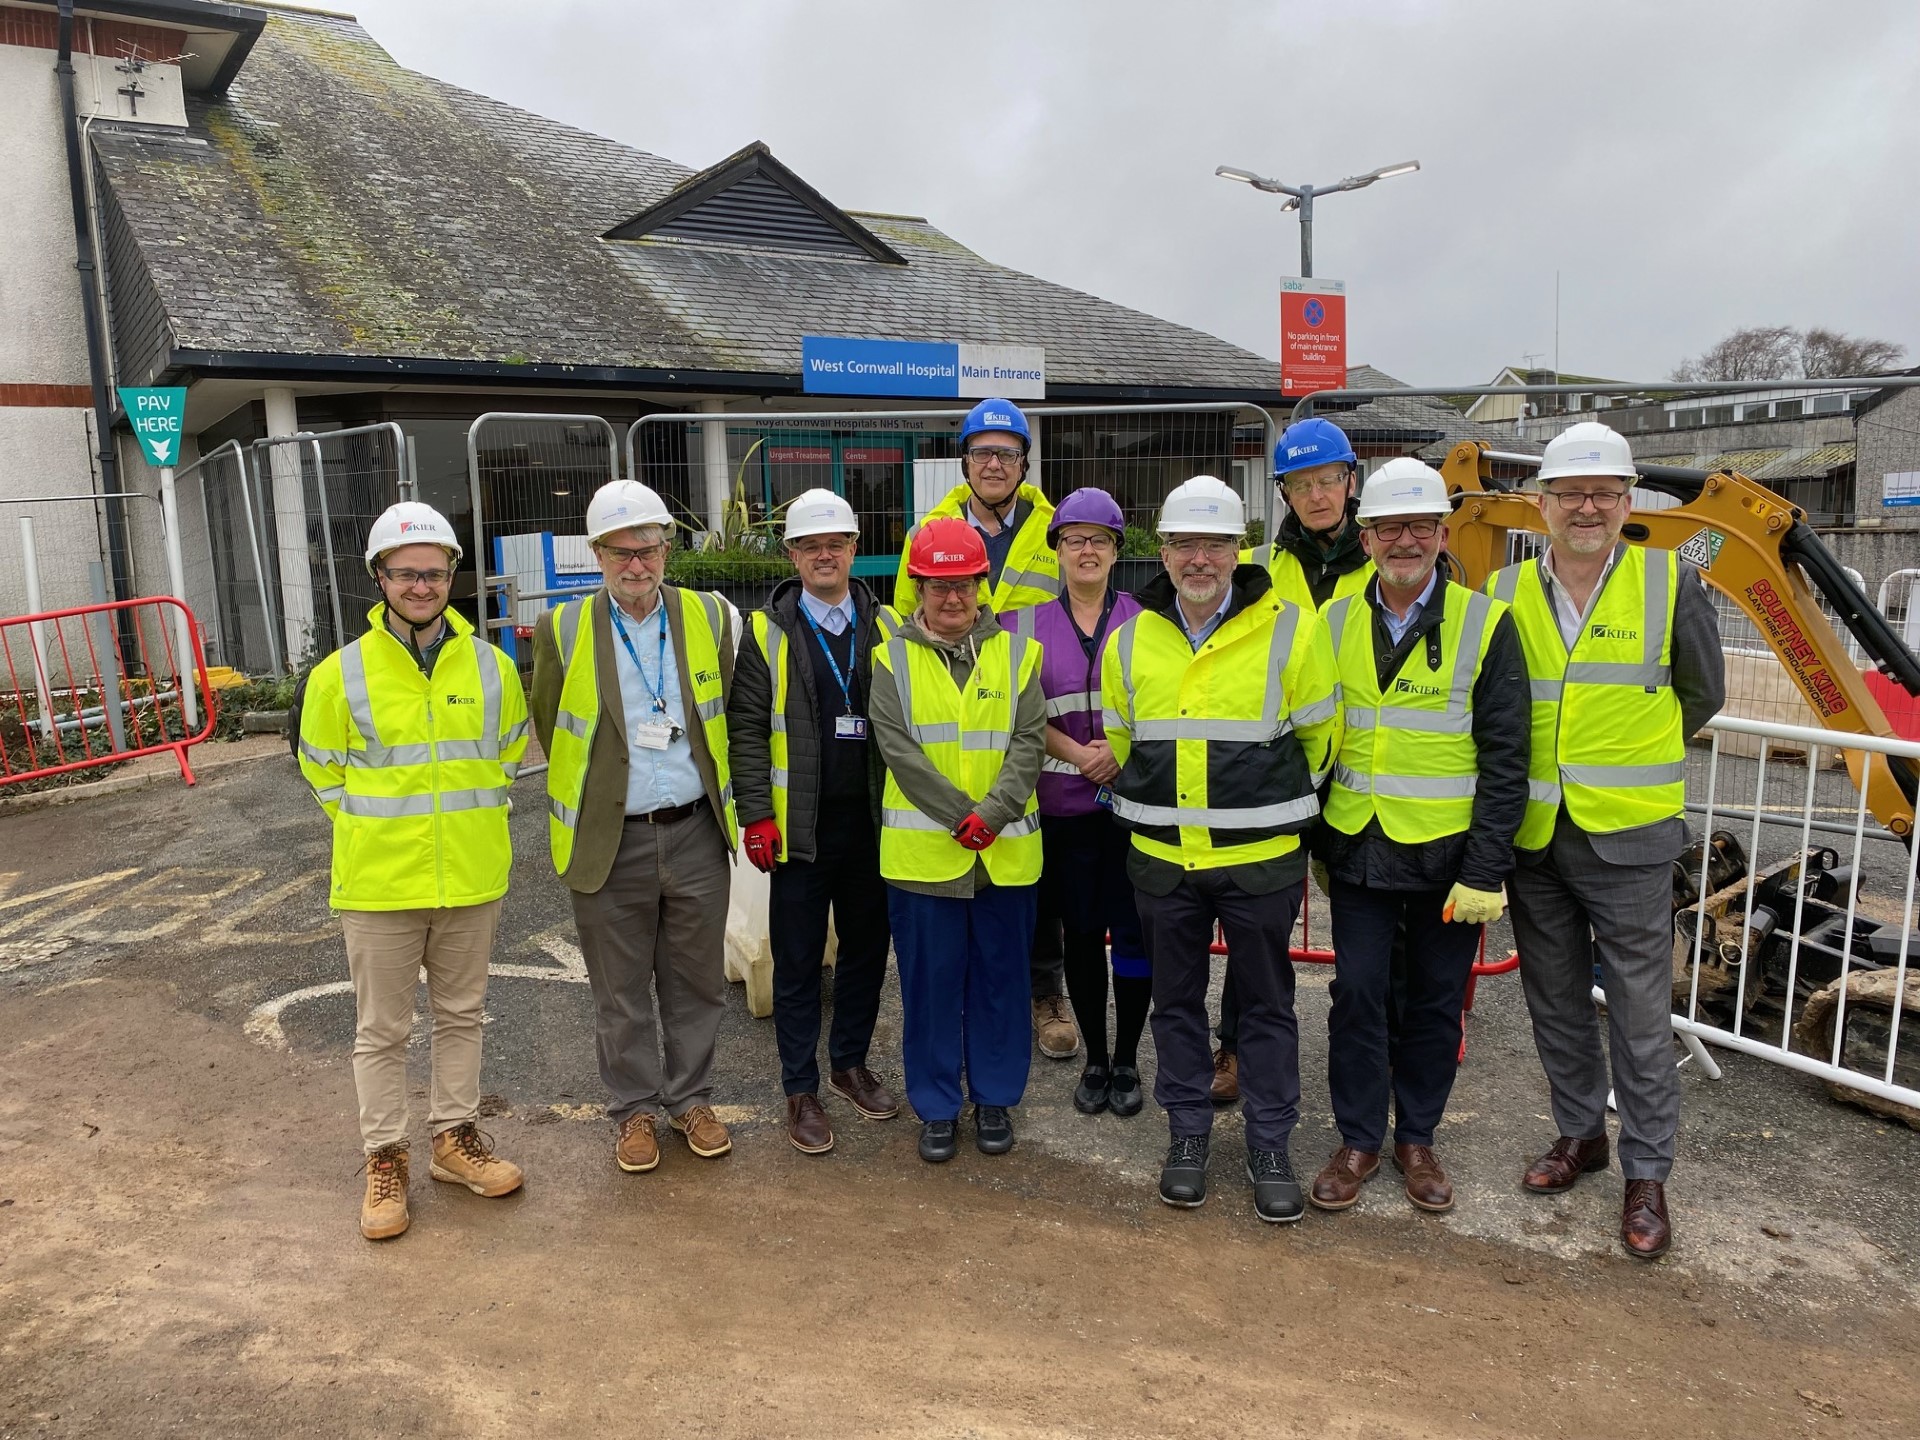 Key people from Kier, the Royal Cornwall Hospitals NHS Trust, and the community gather together at the ground-breaking ceremony for the new Outpatient Department at West Cornwall Hospital.